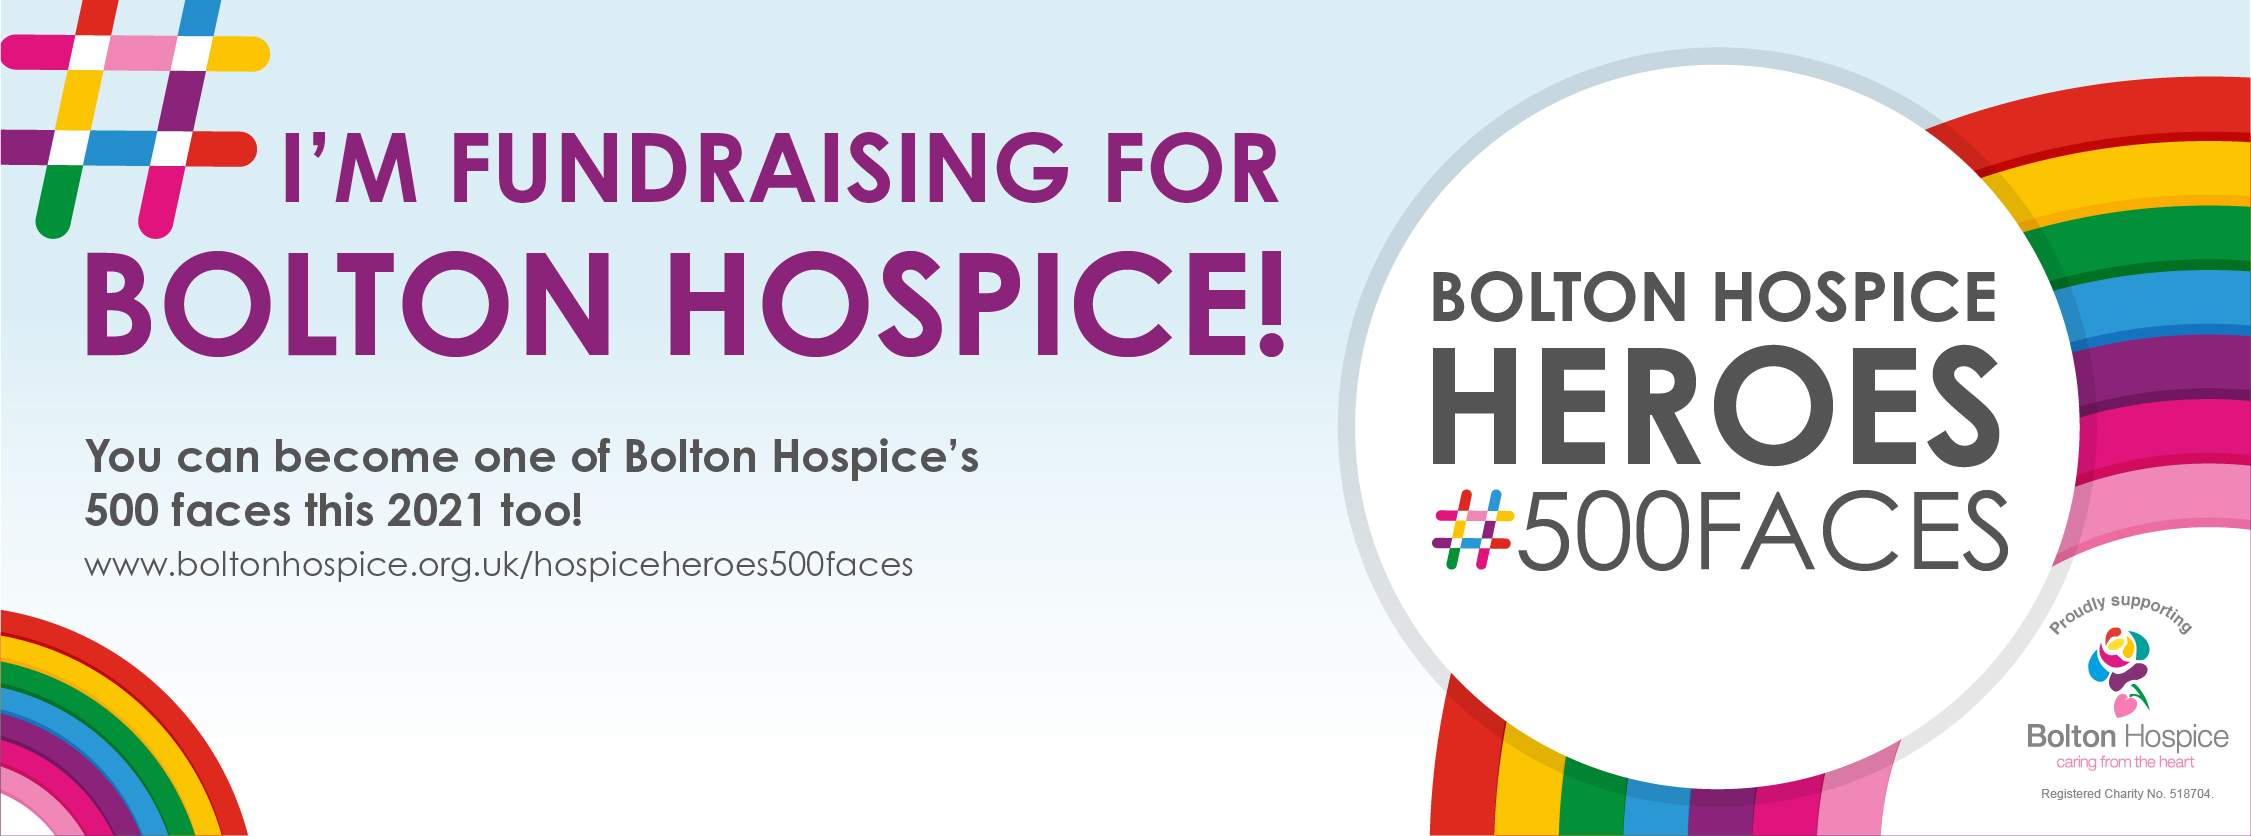 Fundraiser - Bolton Hospice Heroes facebook cover